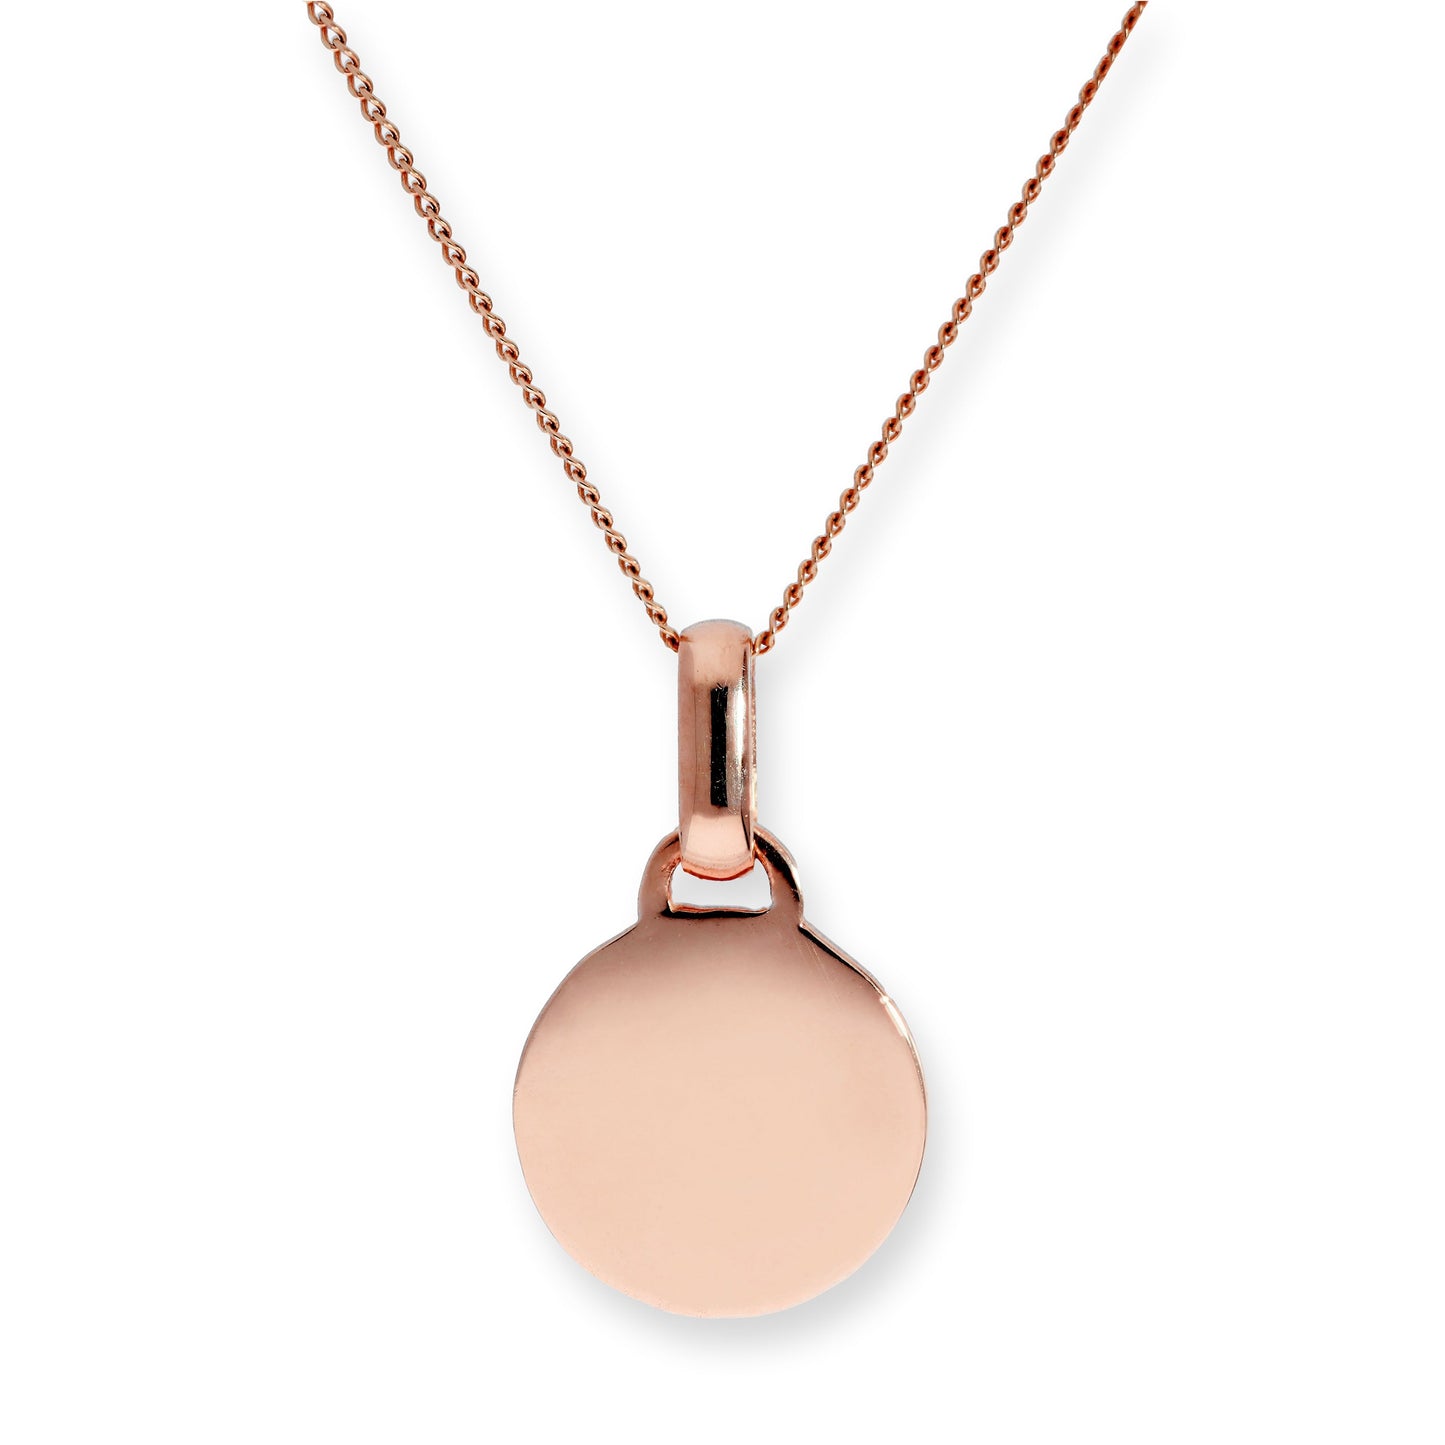 9ct Rose Gold Engravable Round Pendant Necklace 16 - 18 Inches